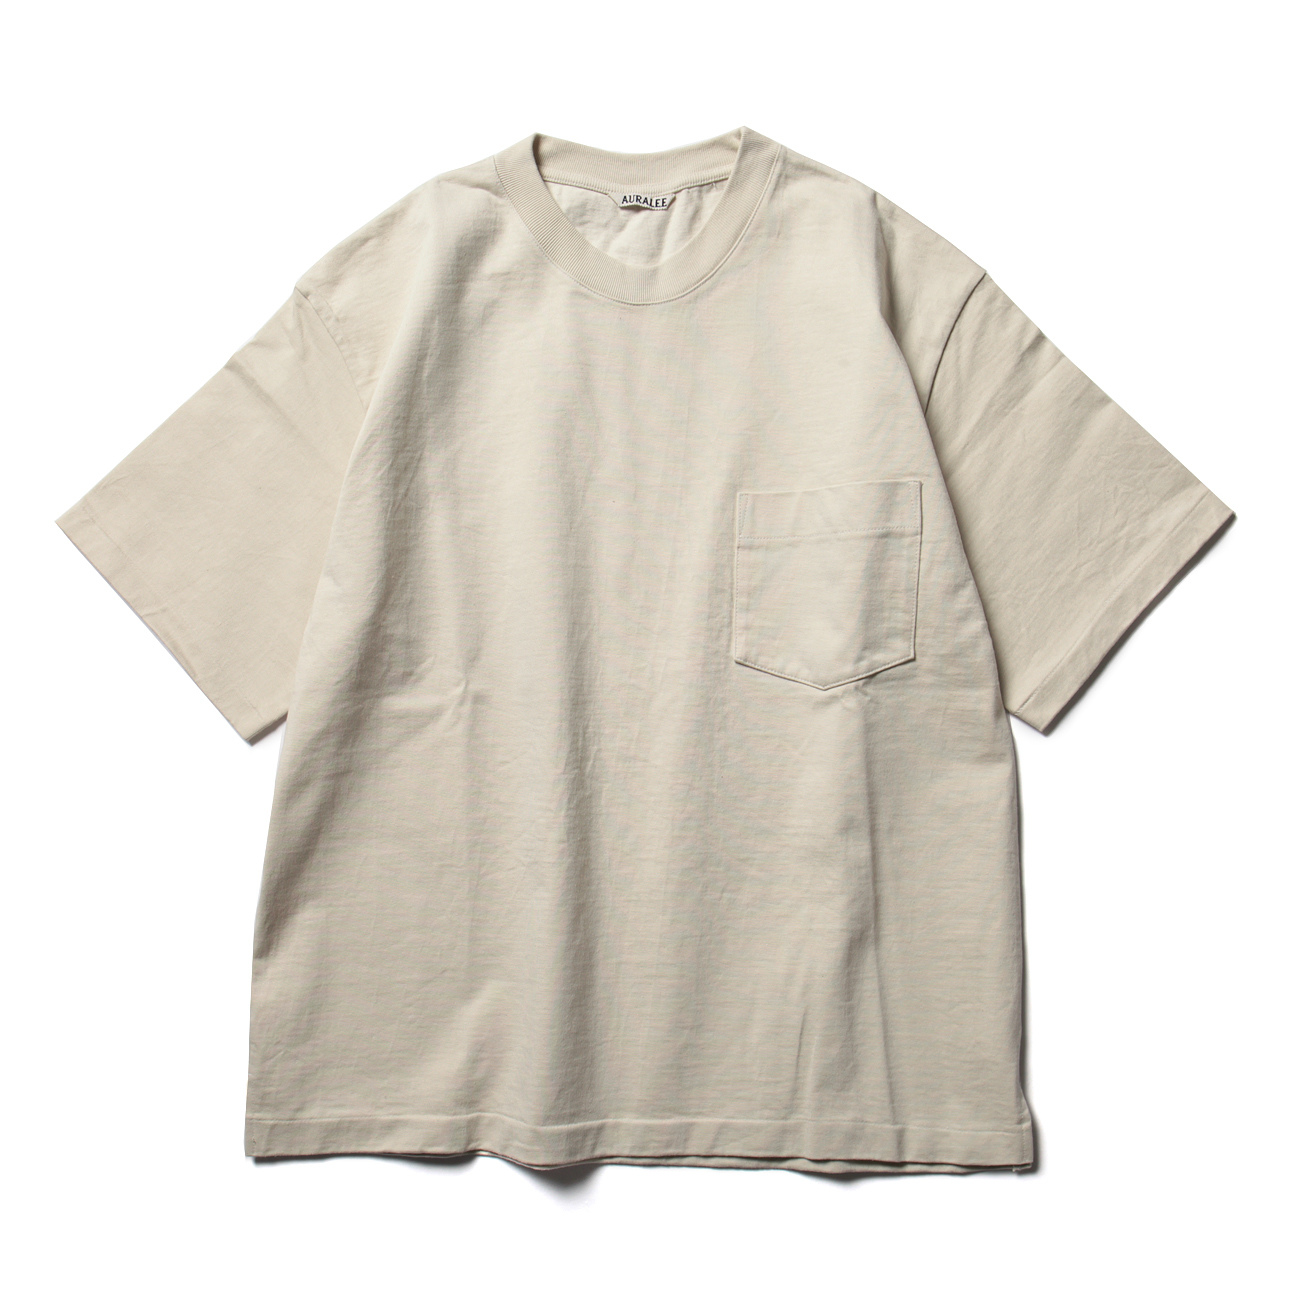 STAND-UP TEE (メンズ) - Ivory Beige